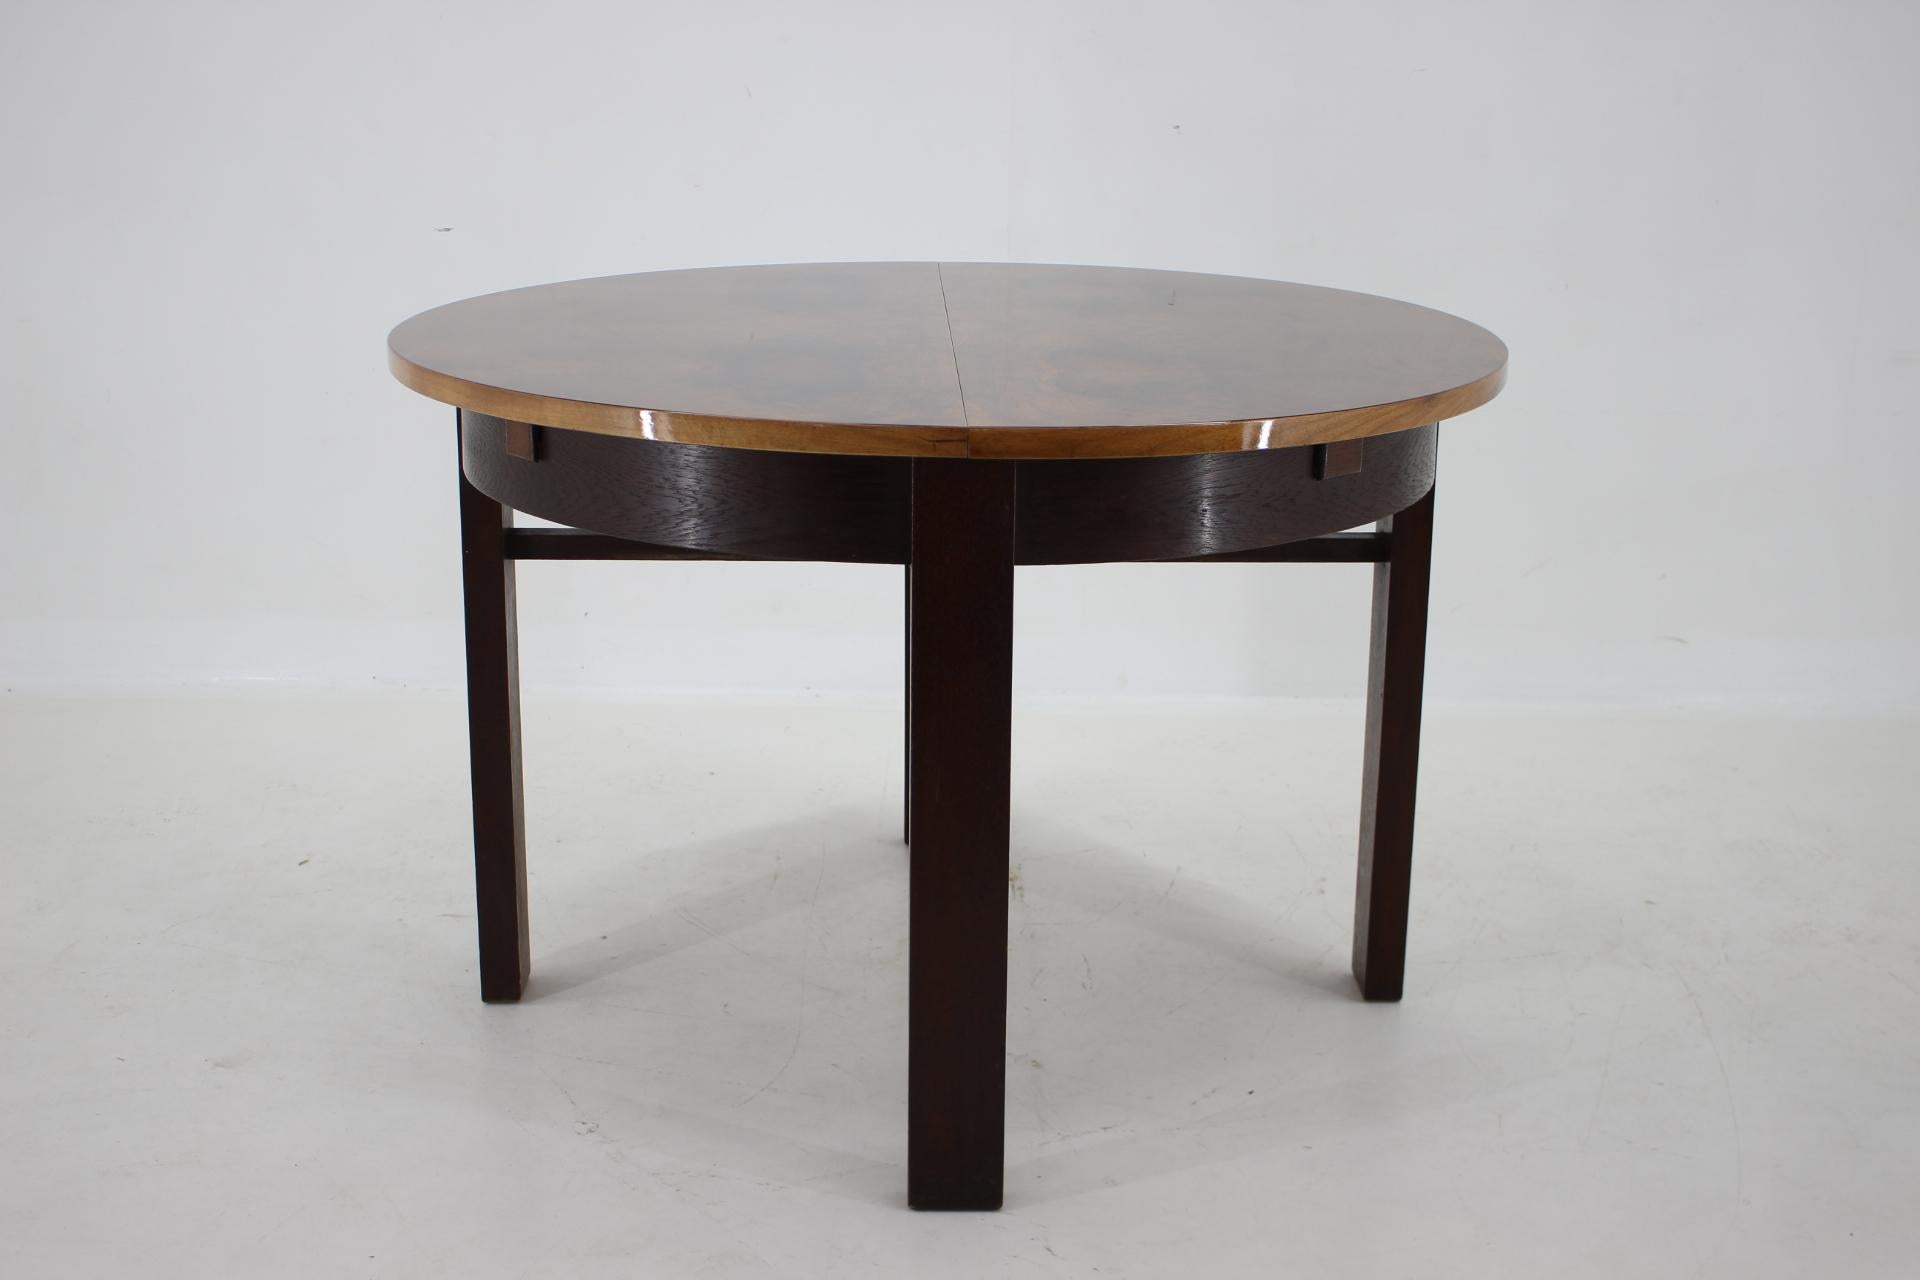 1930s Round /Oval Art Deco Extendable Dining Table in Walnut, Restored  For Sale 4